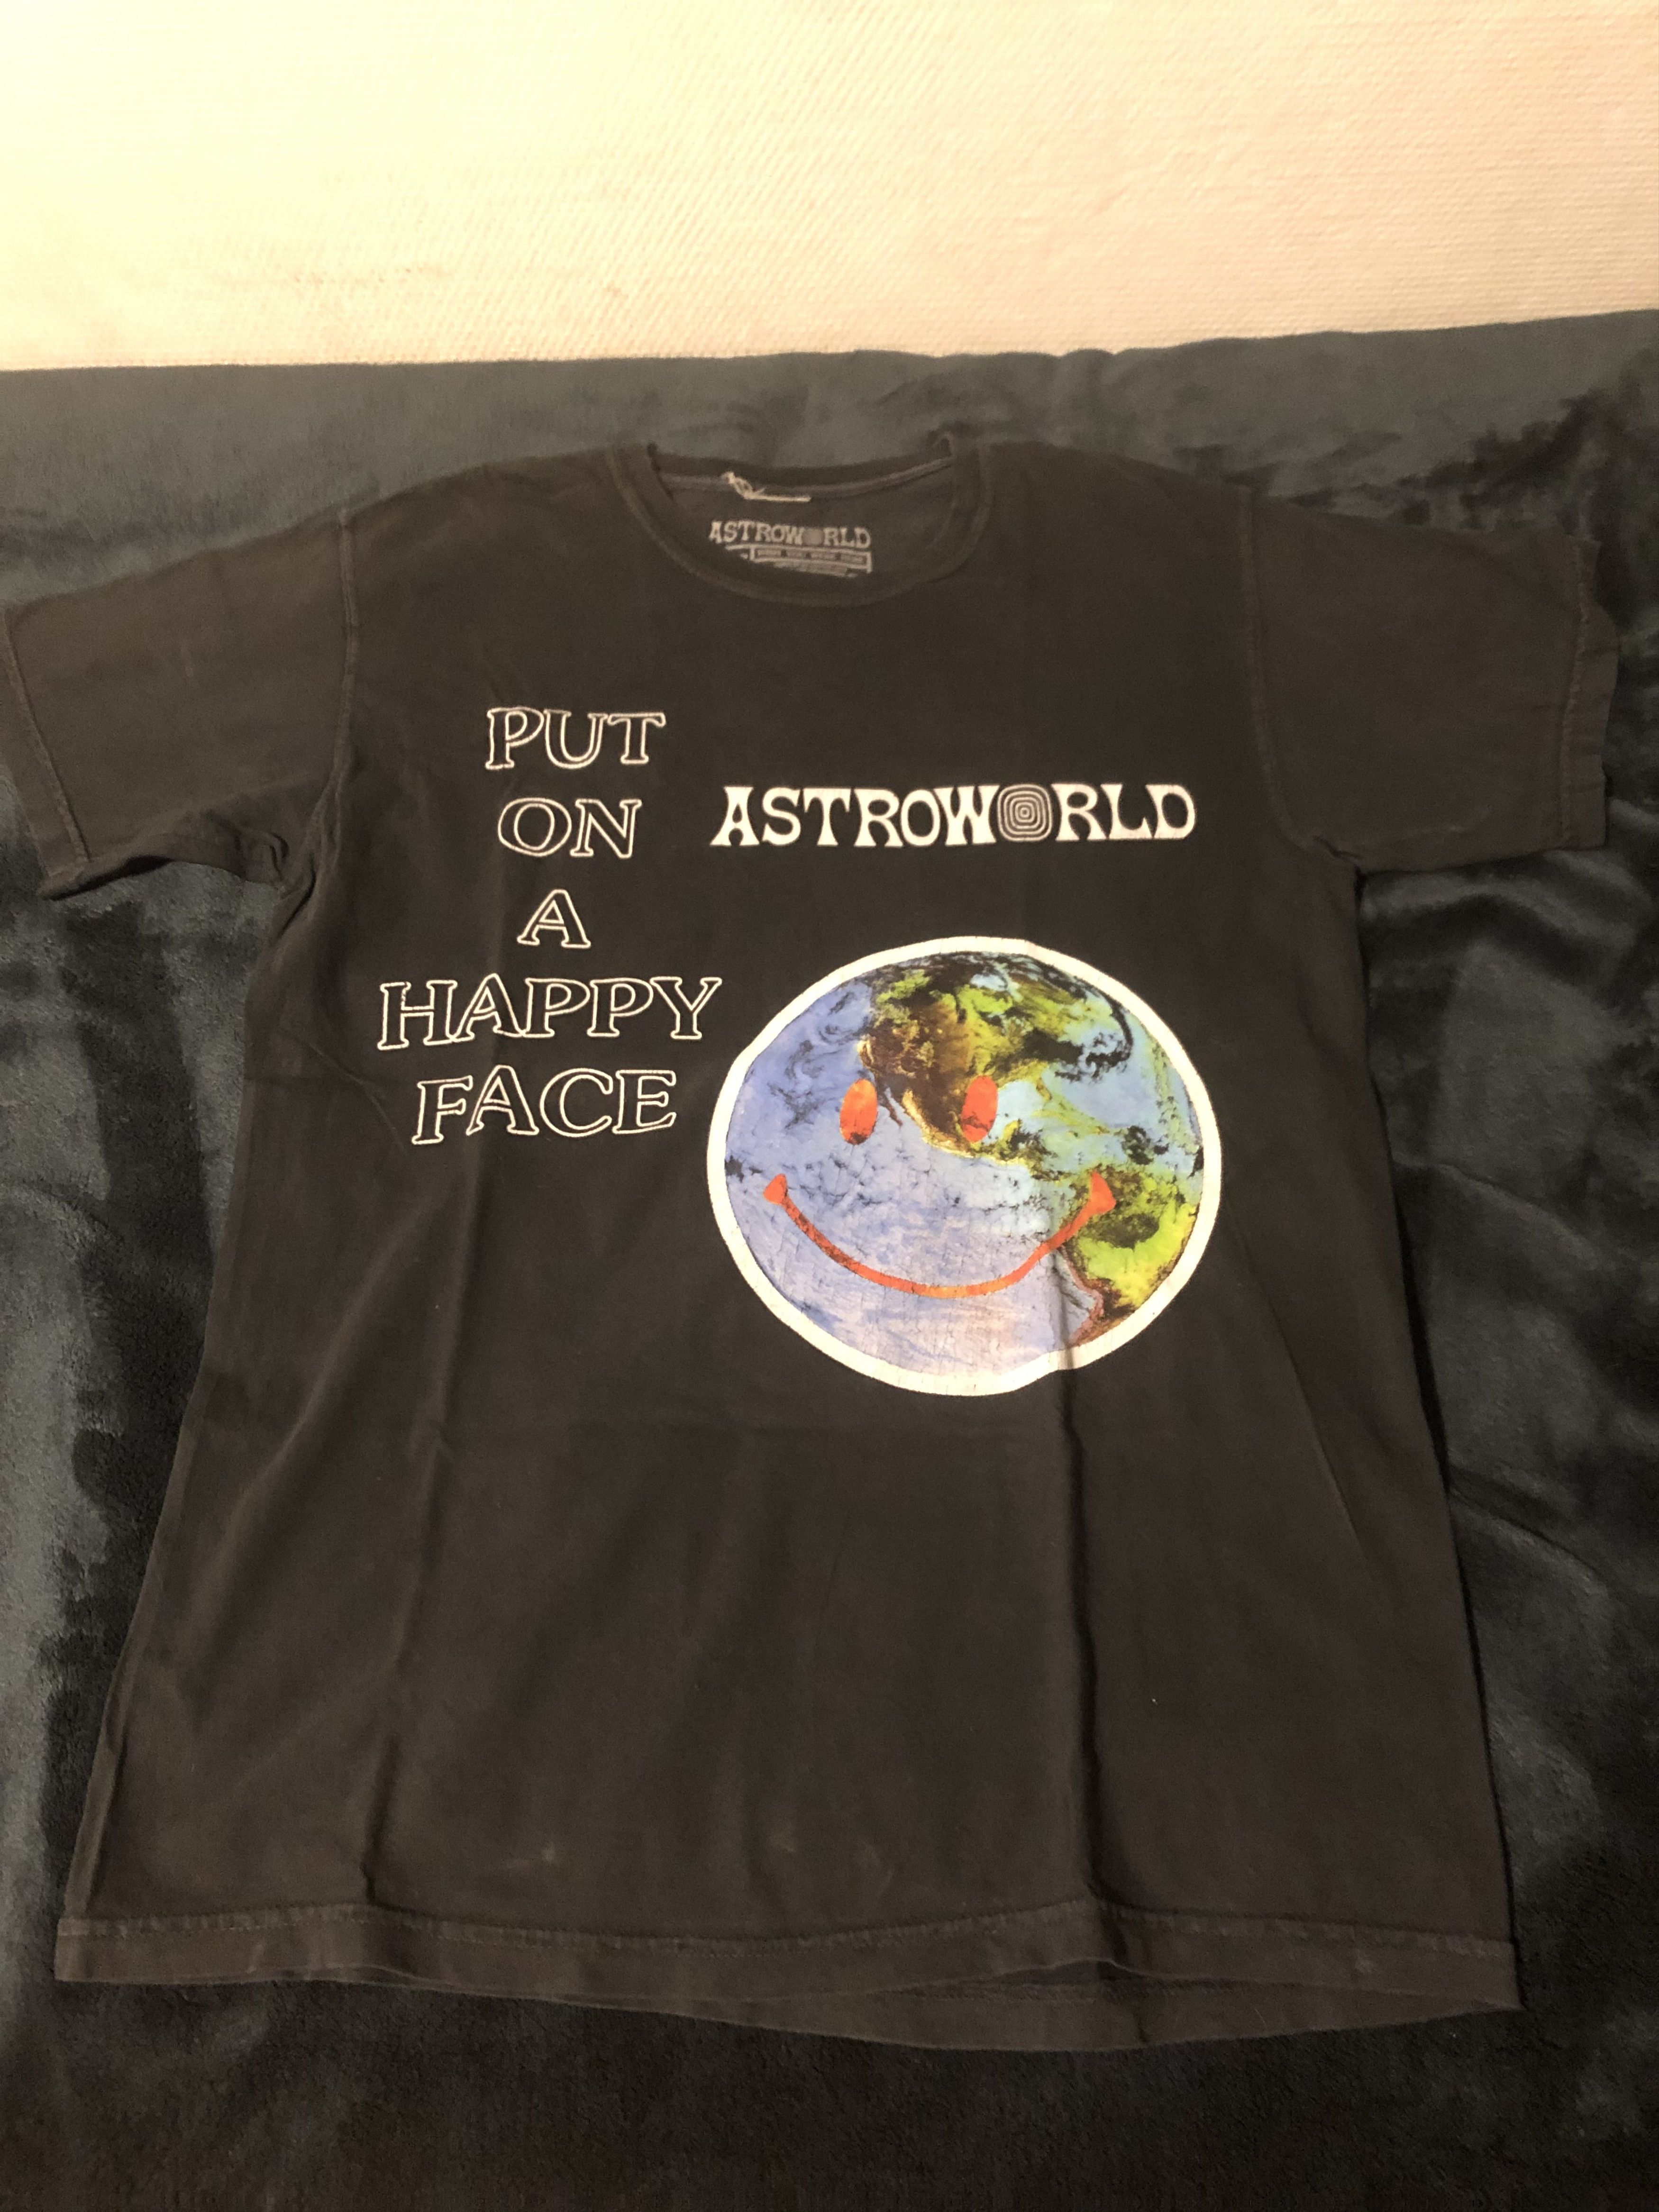 Travis Scott Astroworld Put On A Happy Face Tee Size US M / EU 48-50 / 2 - 2 Preview